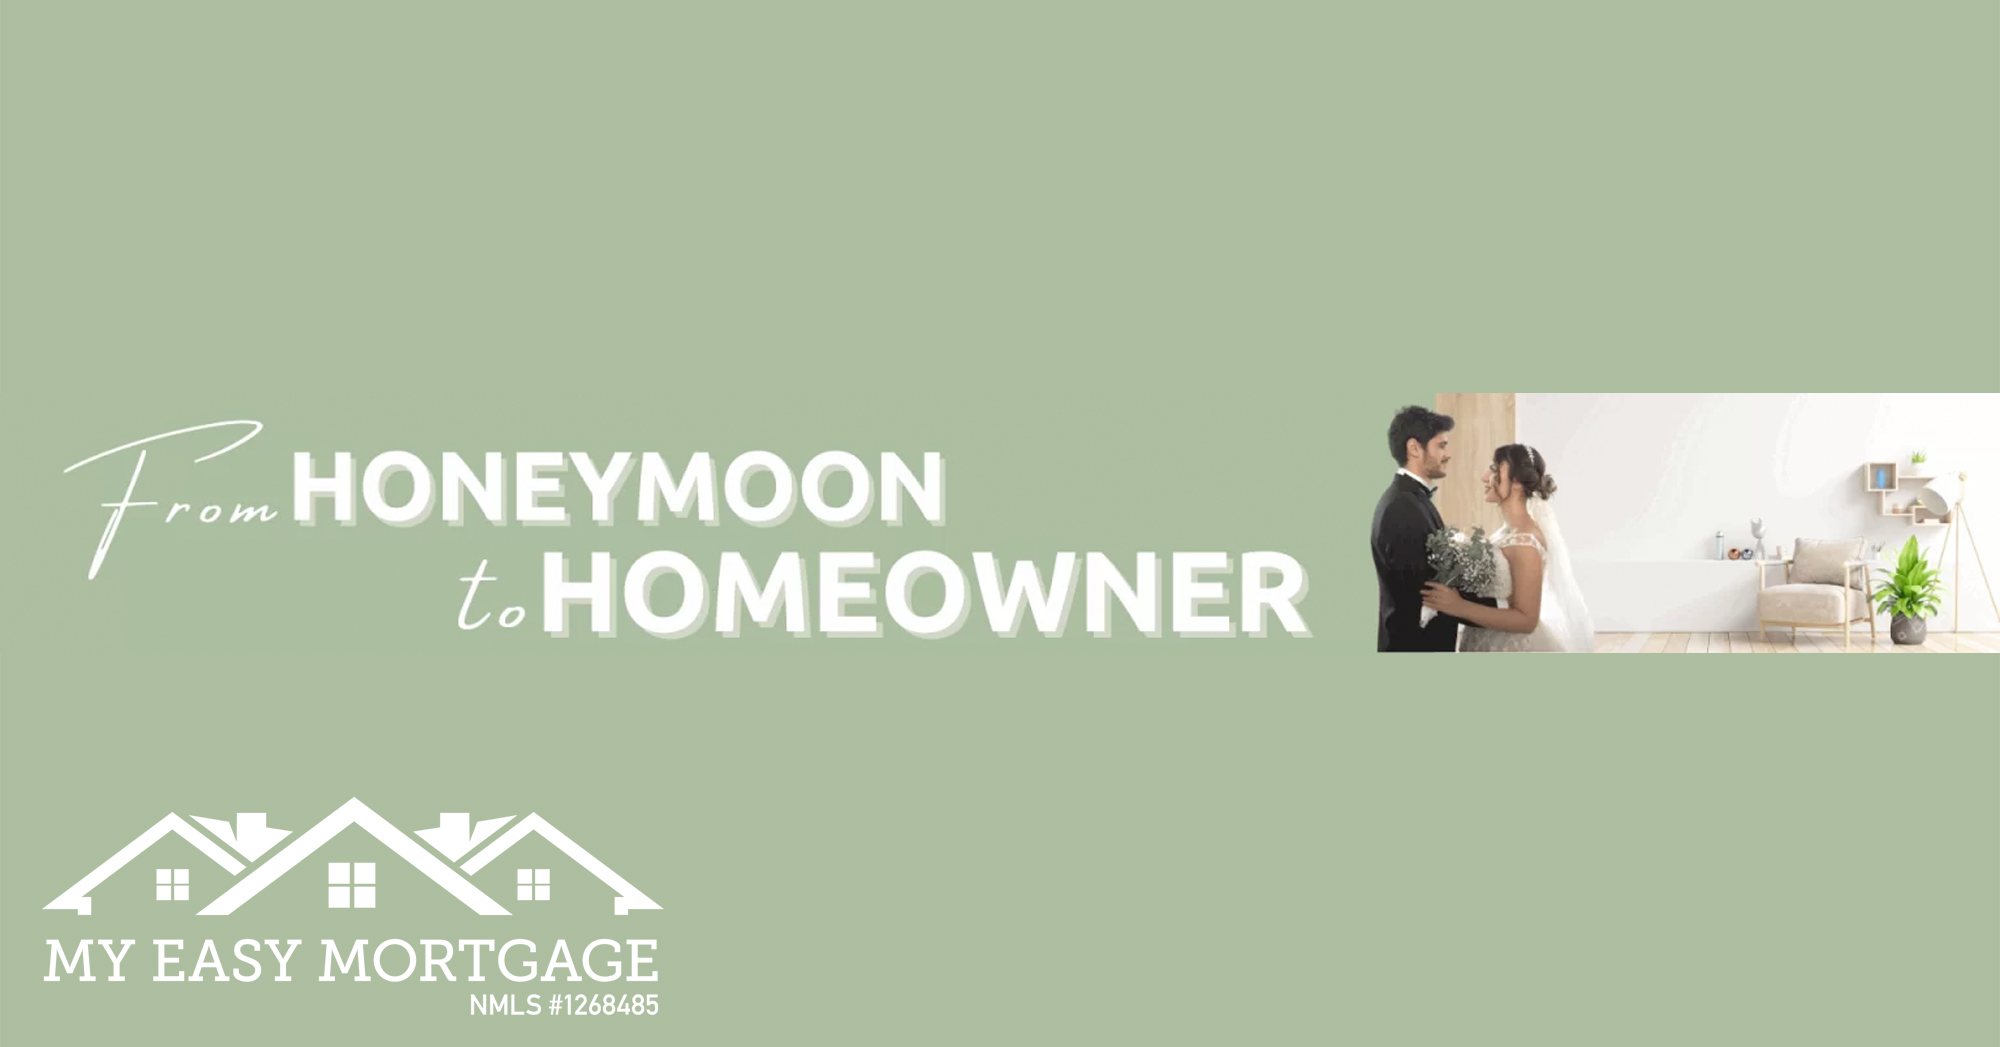 From Honeymoon to Home Owner